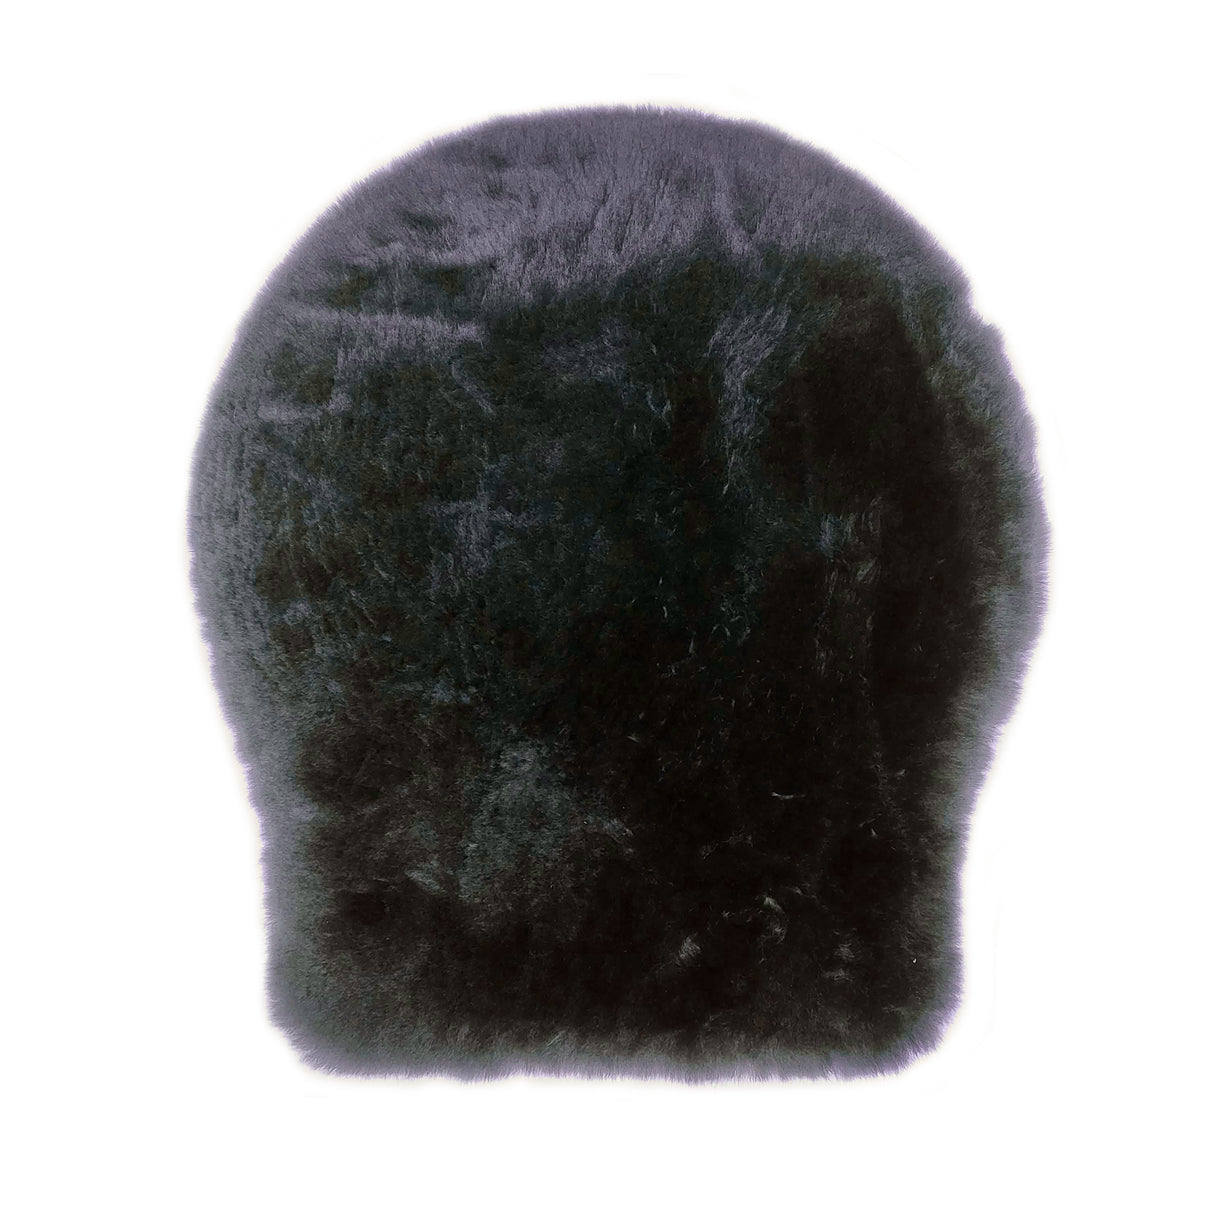 'The Prowler' Small Motorcycle Short Wool Sheepskin Seat Pad